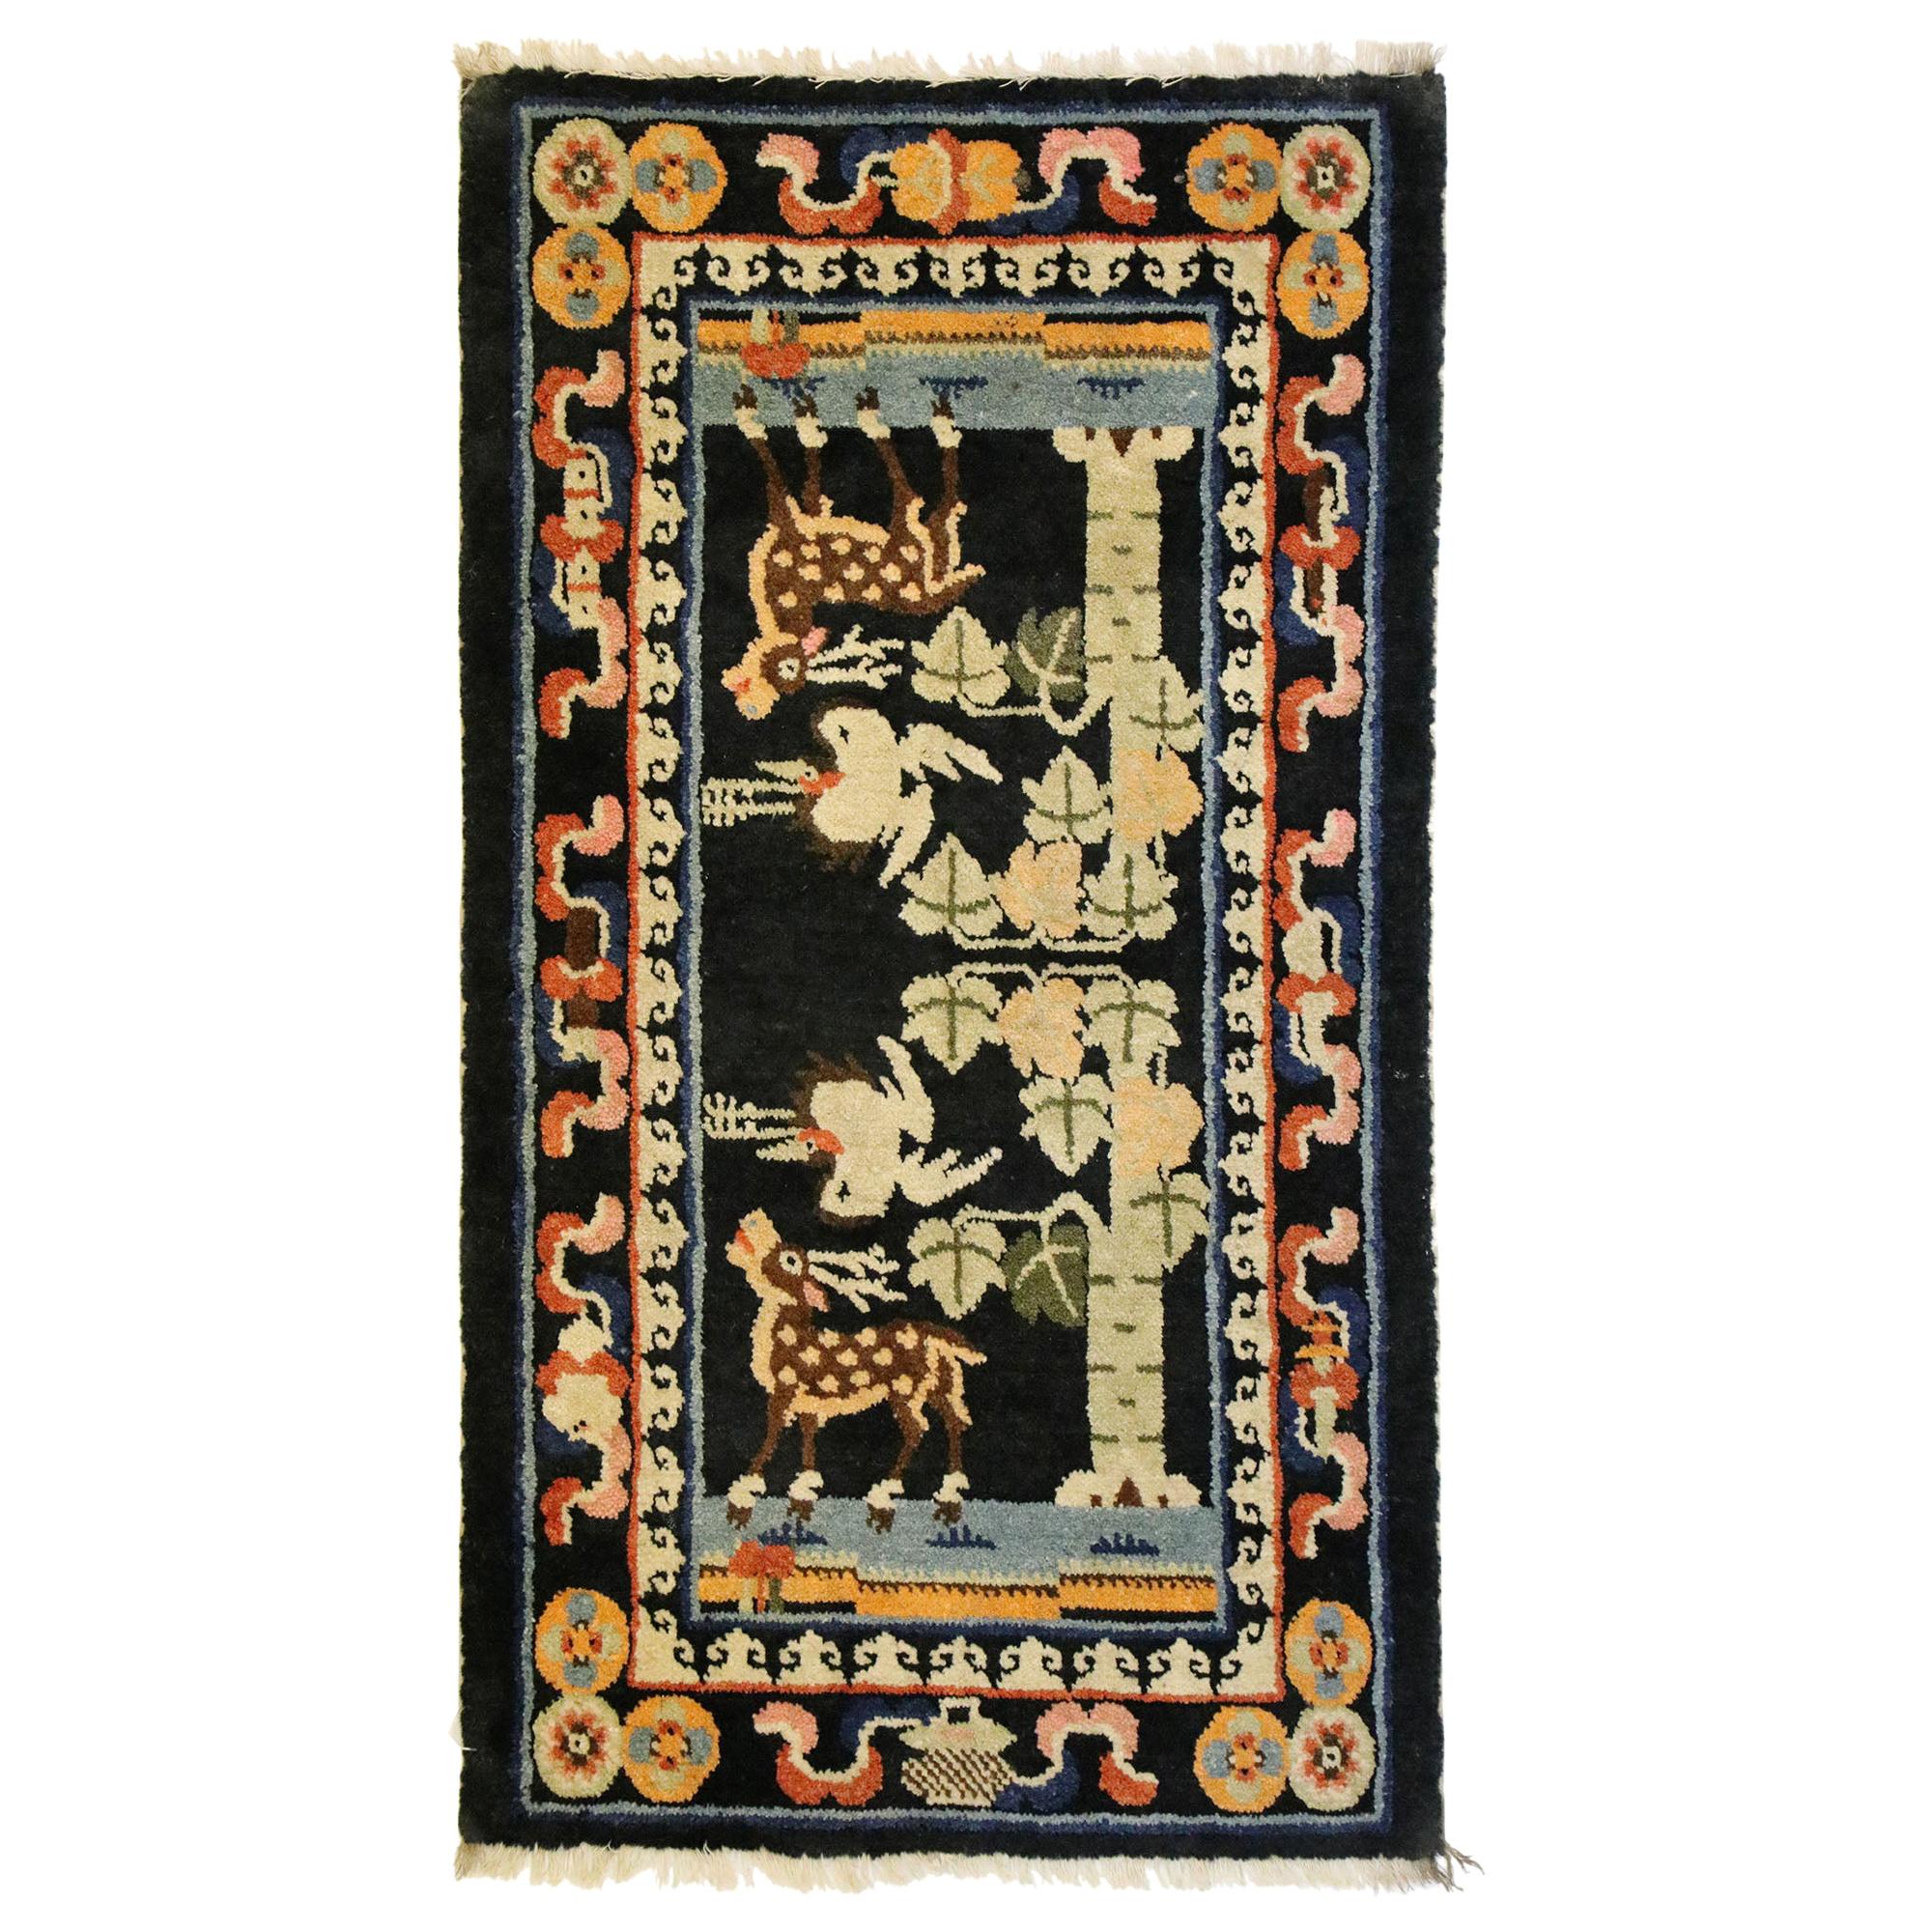 Unique Chinese Style Beautiful Doves Knots Blue Miniature Rug 1:12 